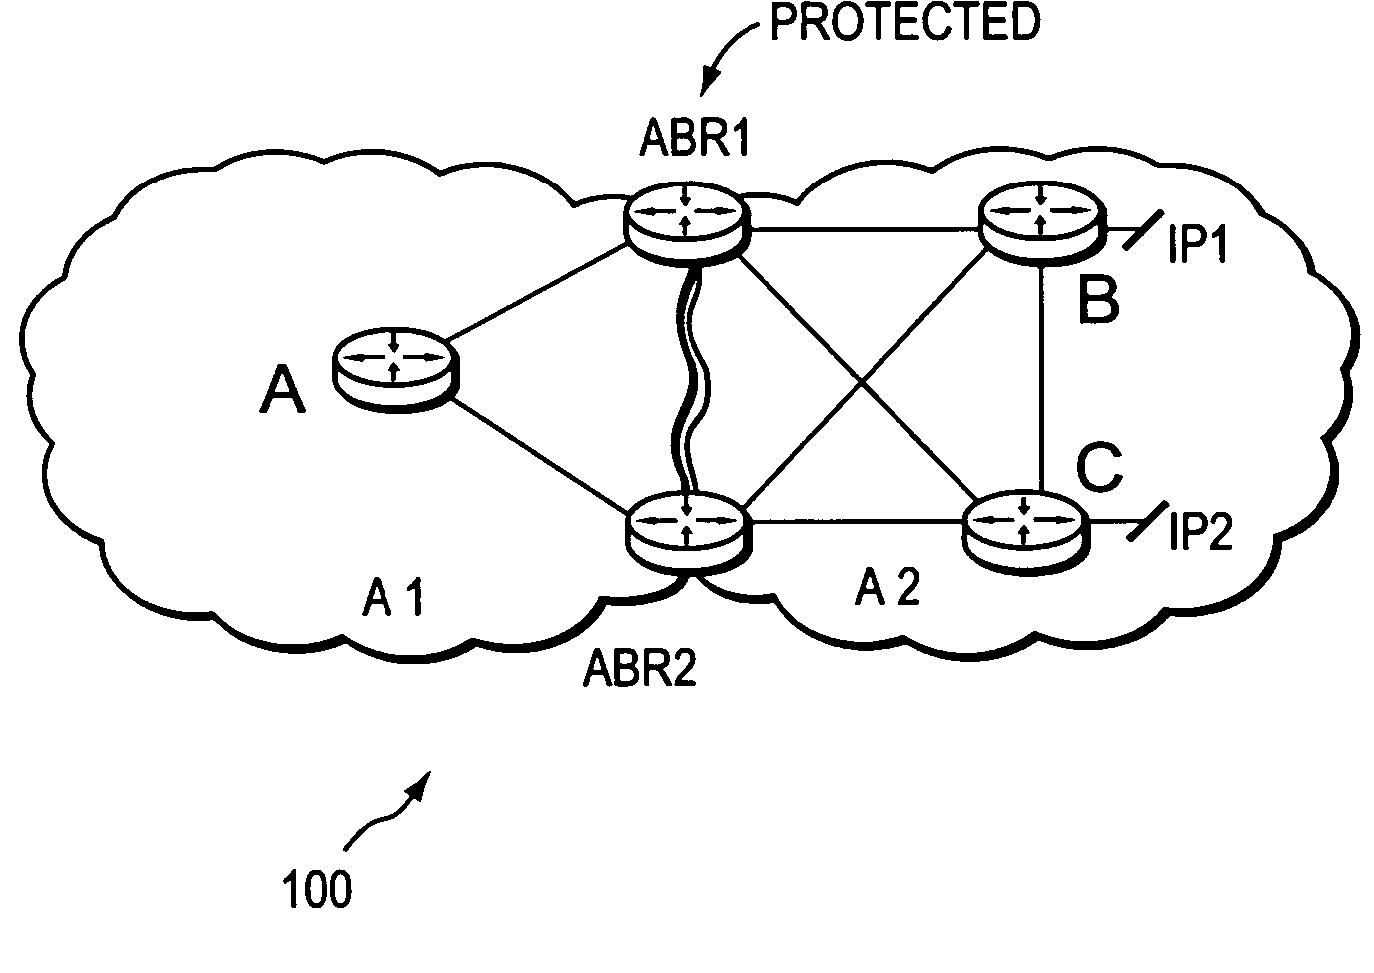 Efficient mechanism for fast recovery in case of border router node failure in a computer network